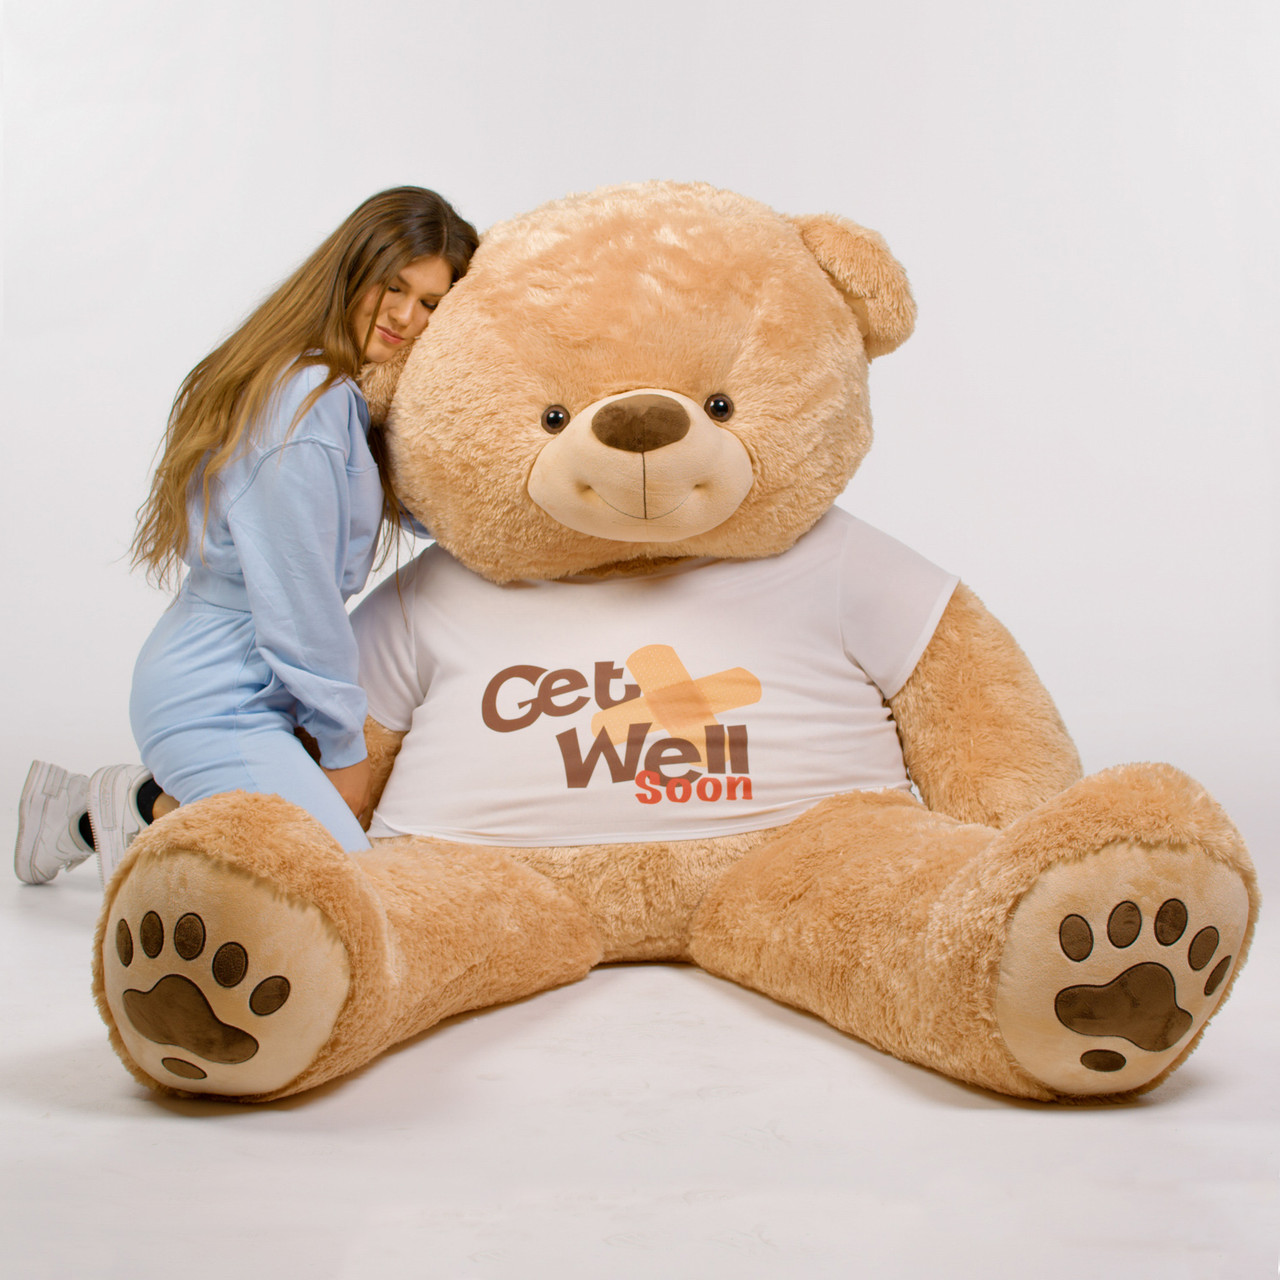 7ft Soft and Cuddly Tan Teddy Bear Gift from Giant Teddy